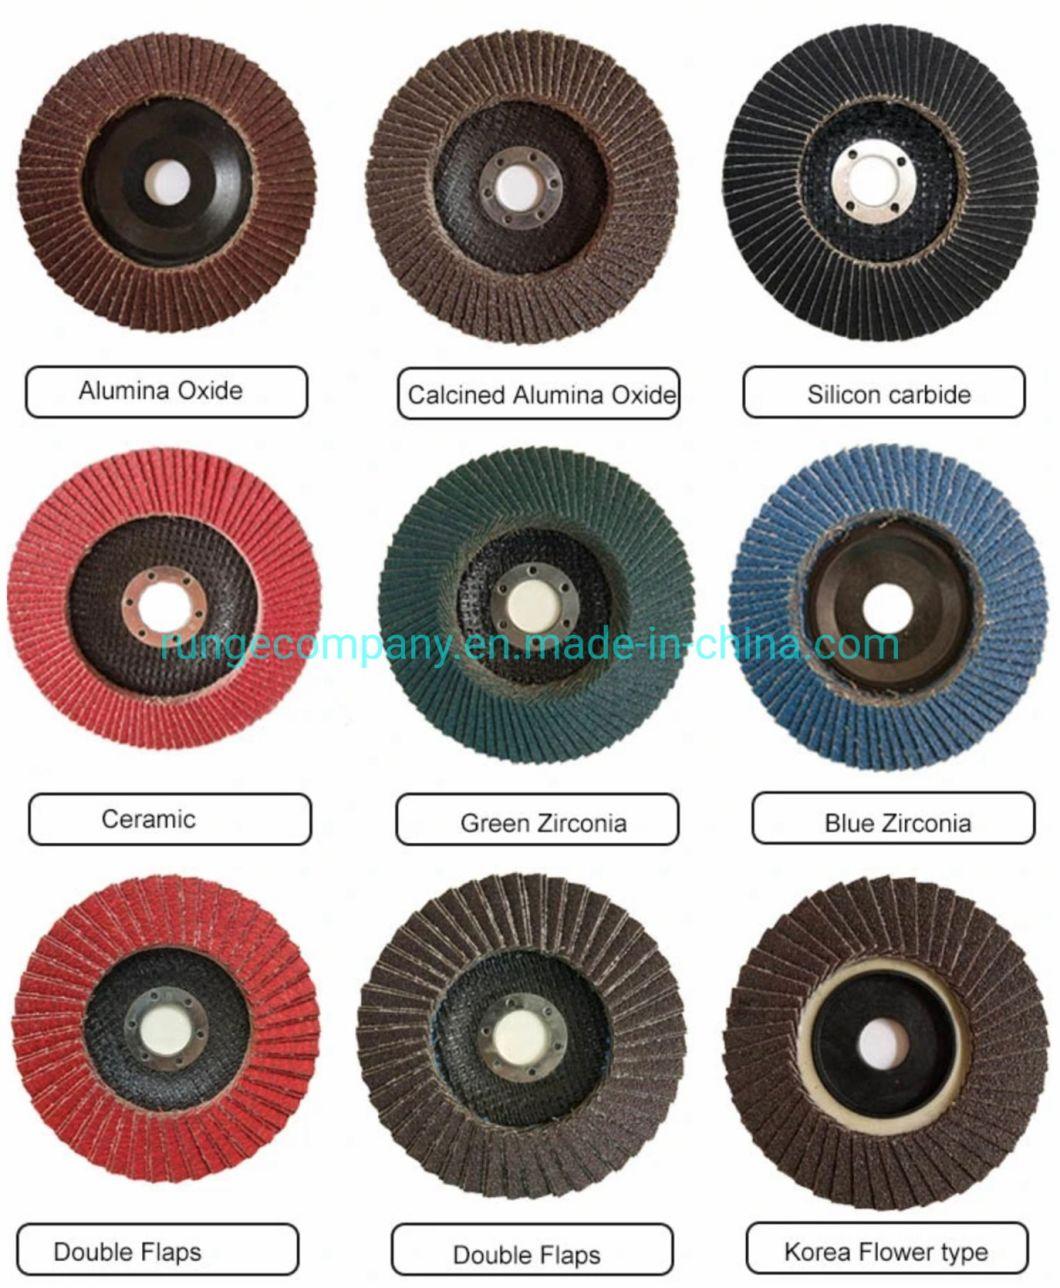 Power Tool Parts & Accessories Flap Disc Sanding Pad Grinding Discs 4.5" Inch Grinder Wheel (Blue) for Stainless Steel Metals, Wood